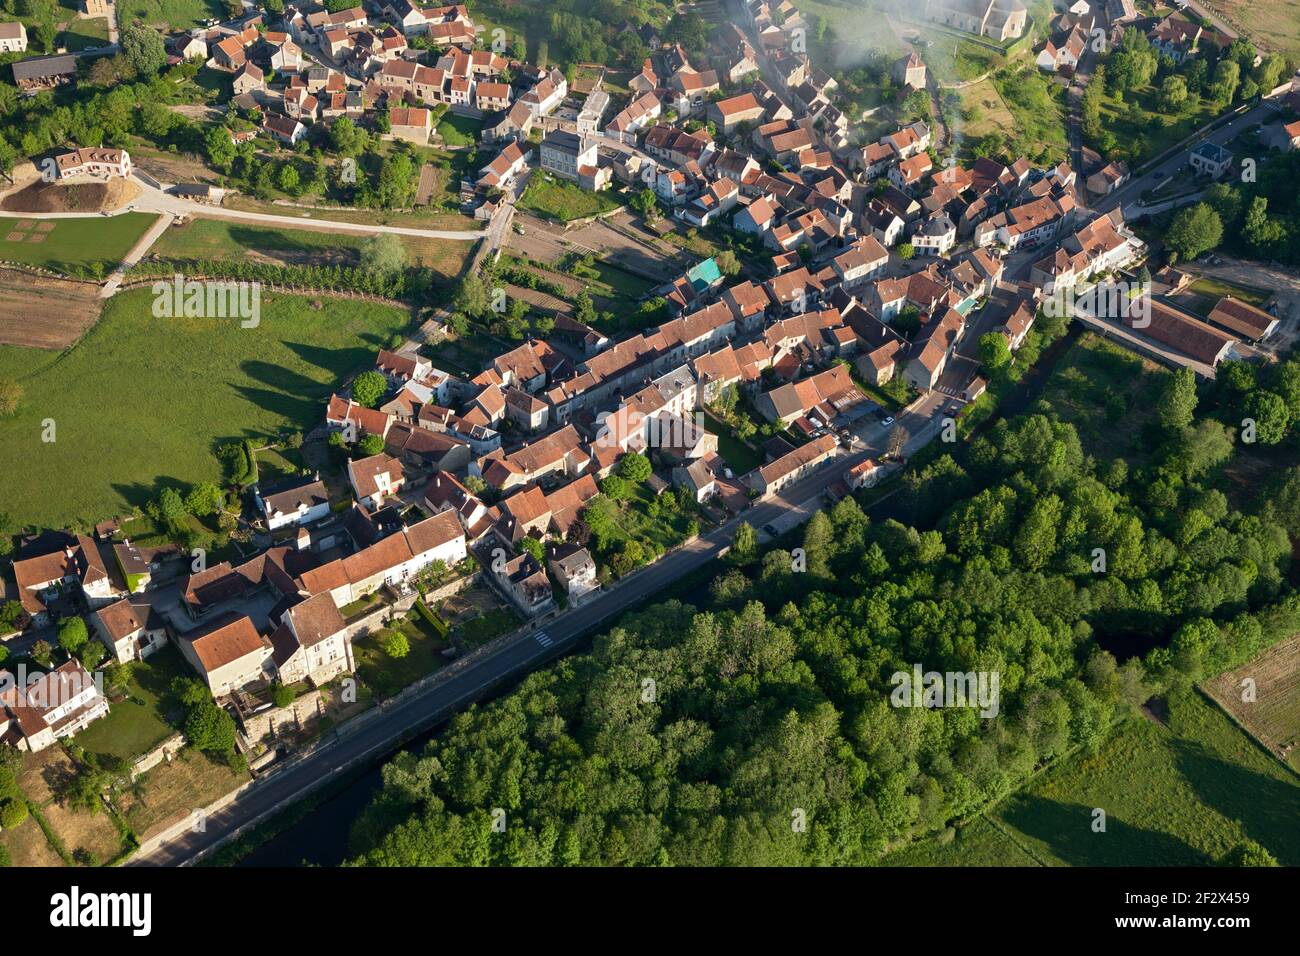 Aerial photograph of Asquins 89450, in Yonne department, Bourgogne-Franche-comté region, France Stock Photo